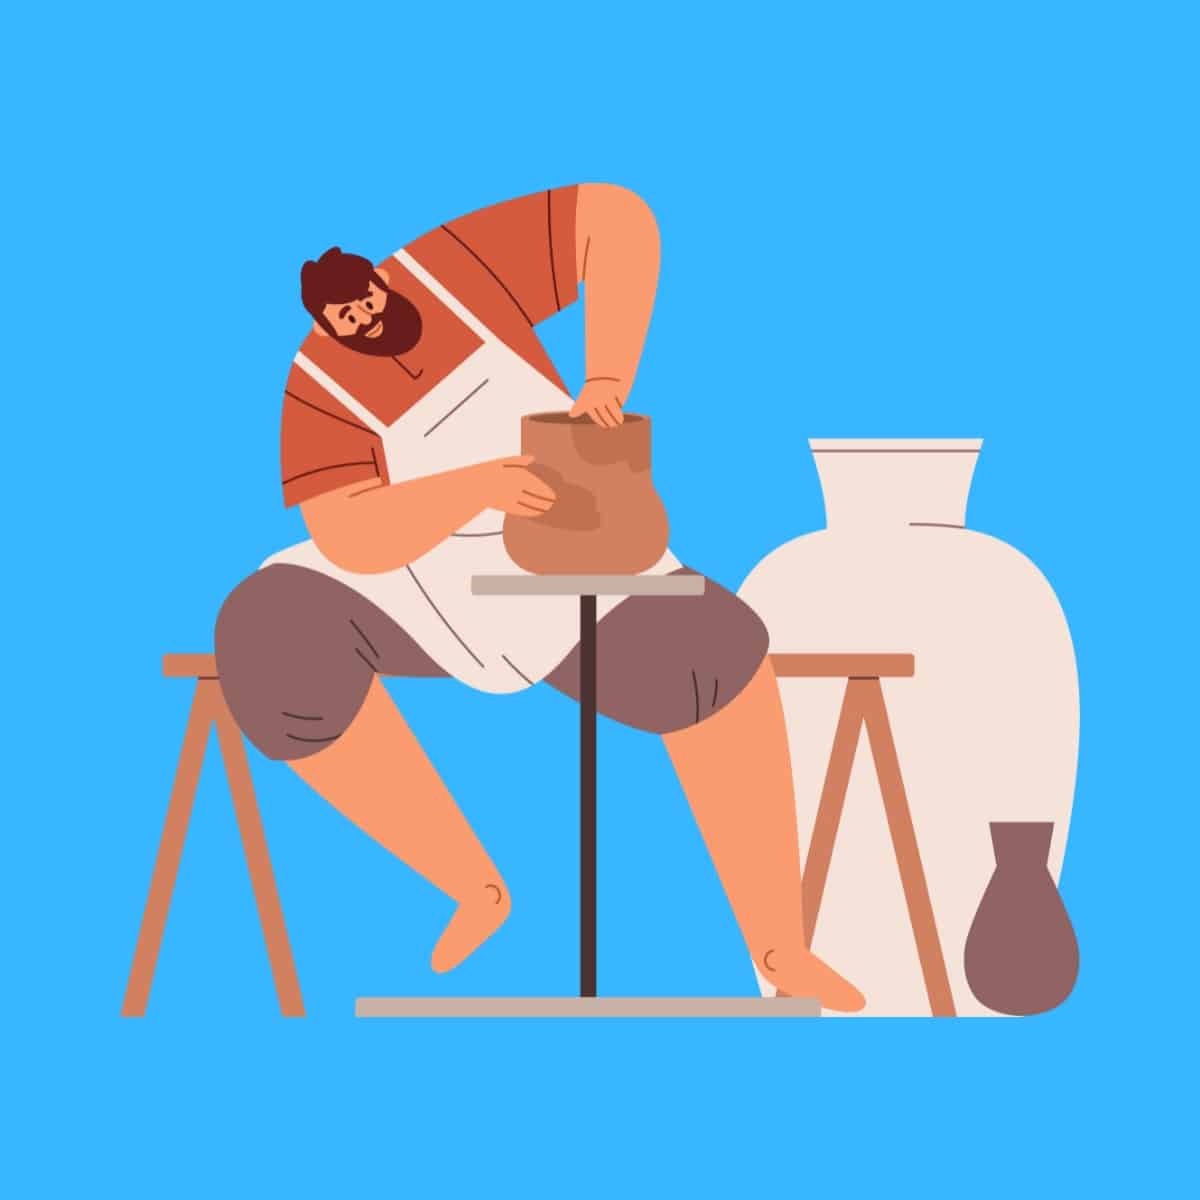 Cartoon graphic of a man on a stool making clay pots on a blue background.